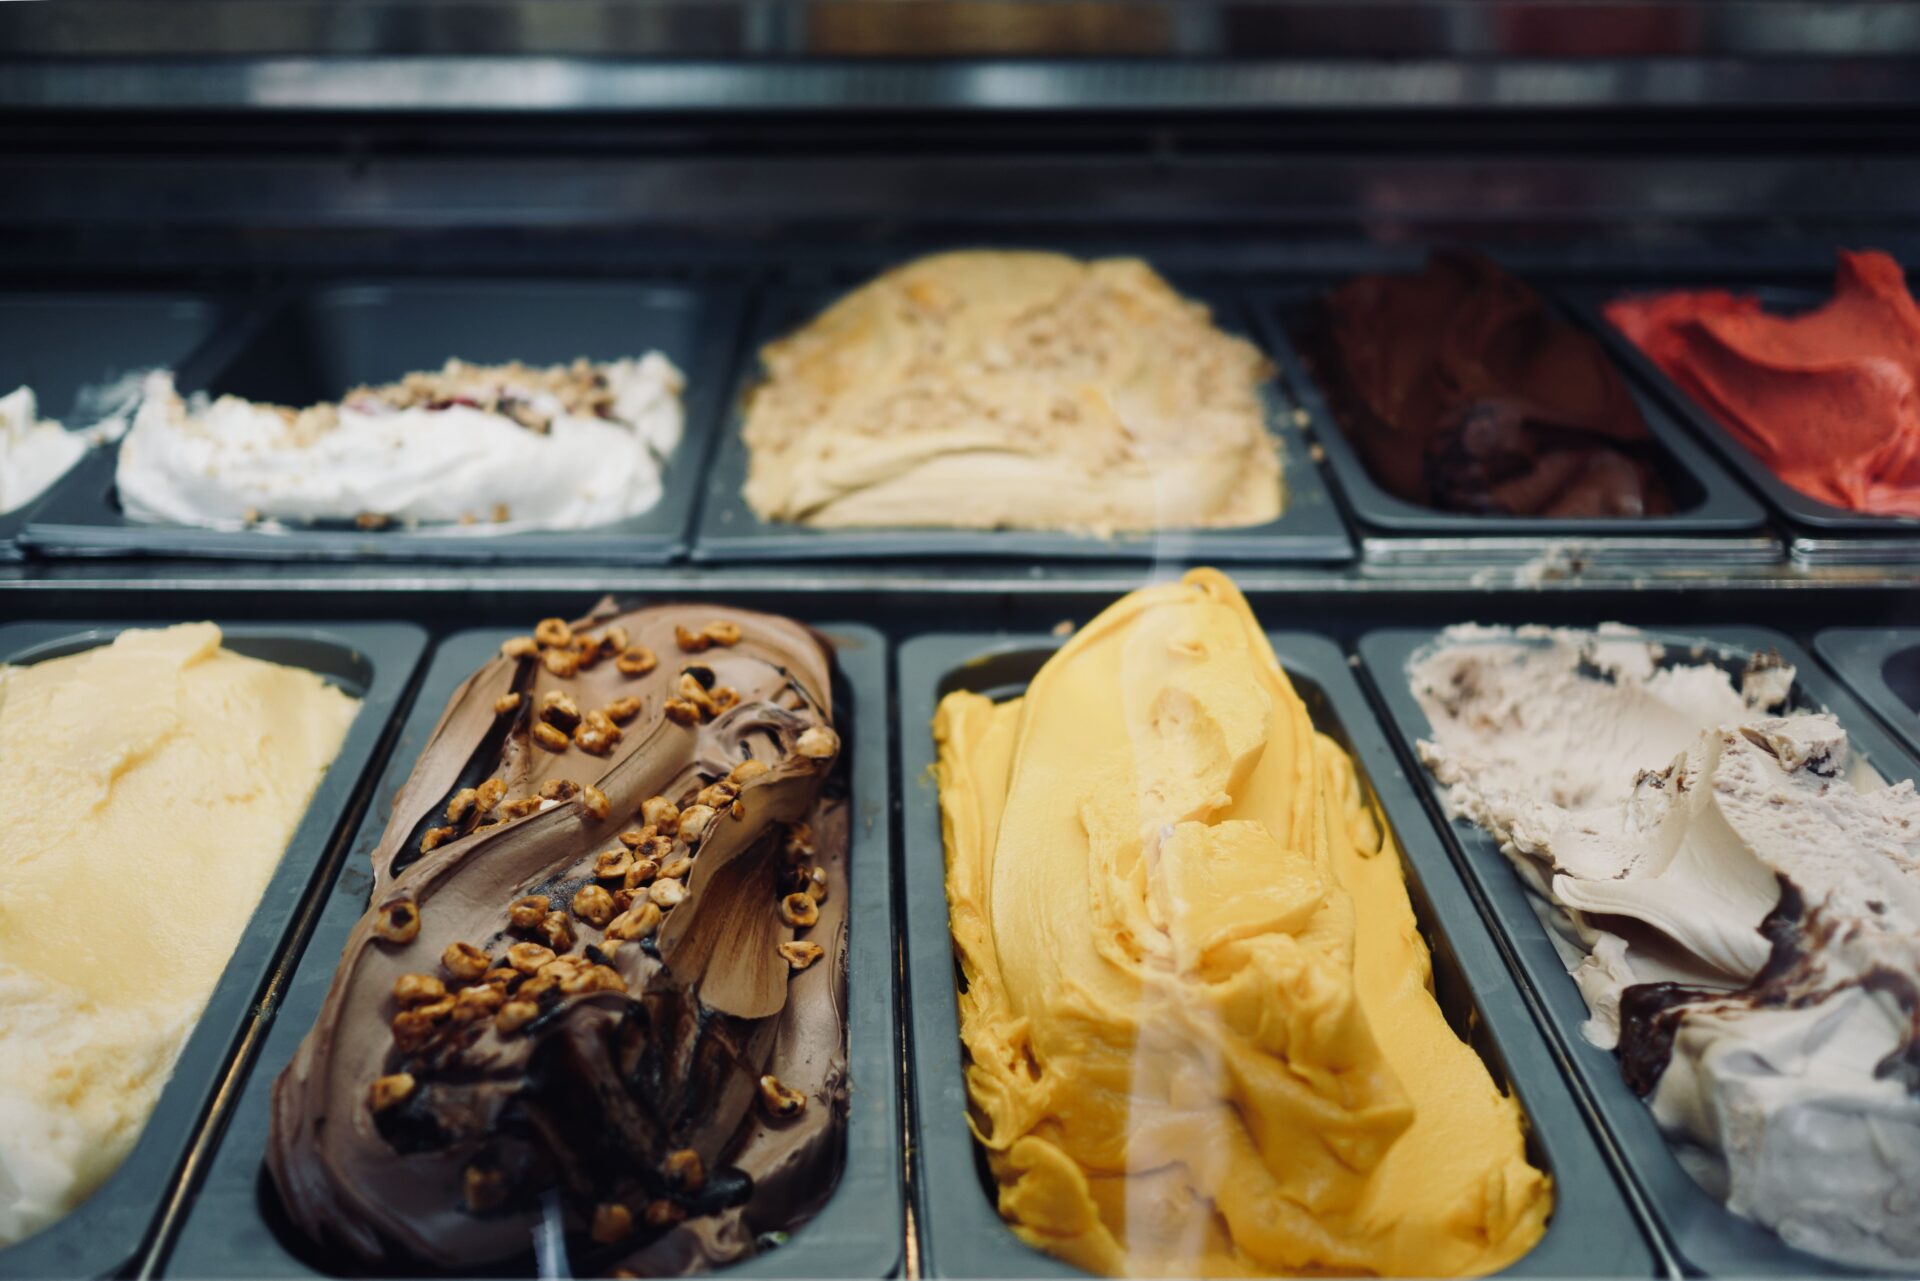 A tray of several different ice cream flavors.